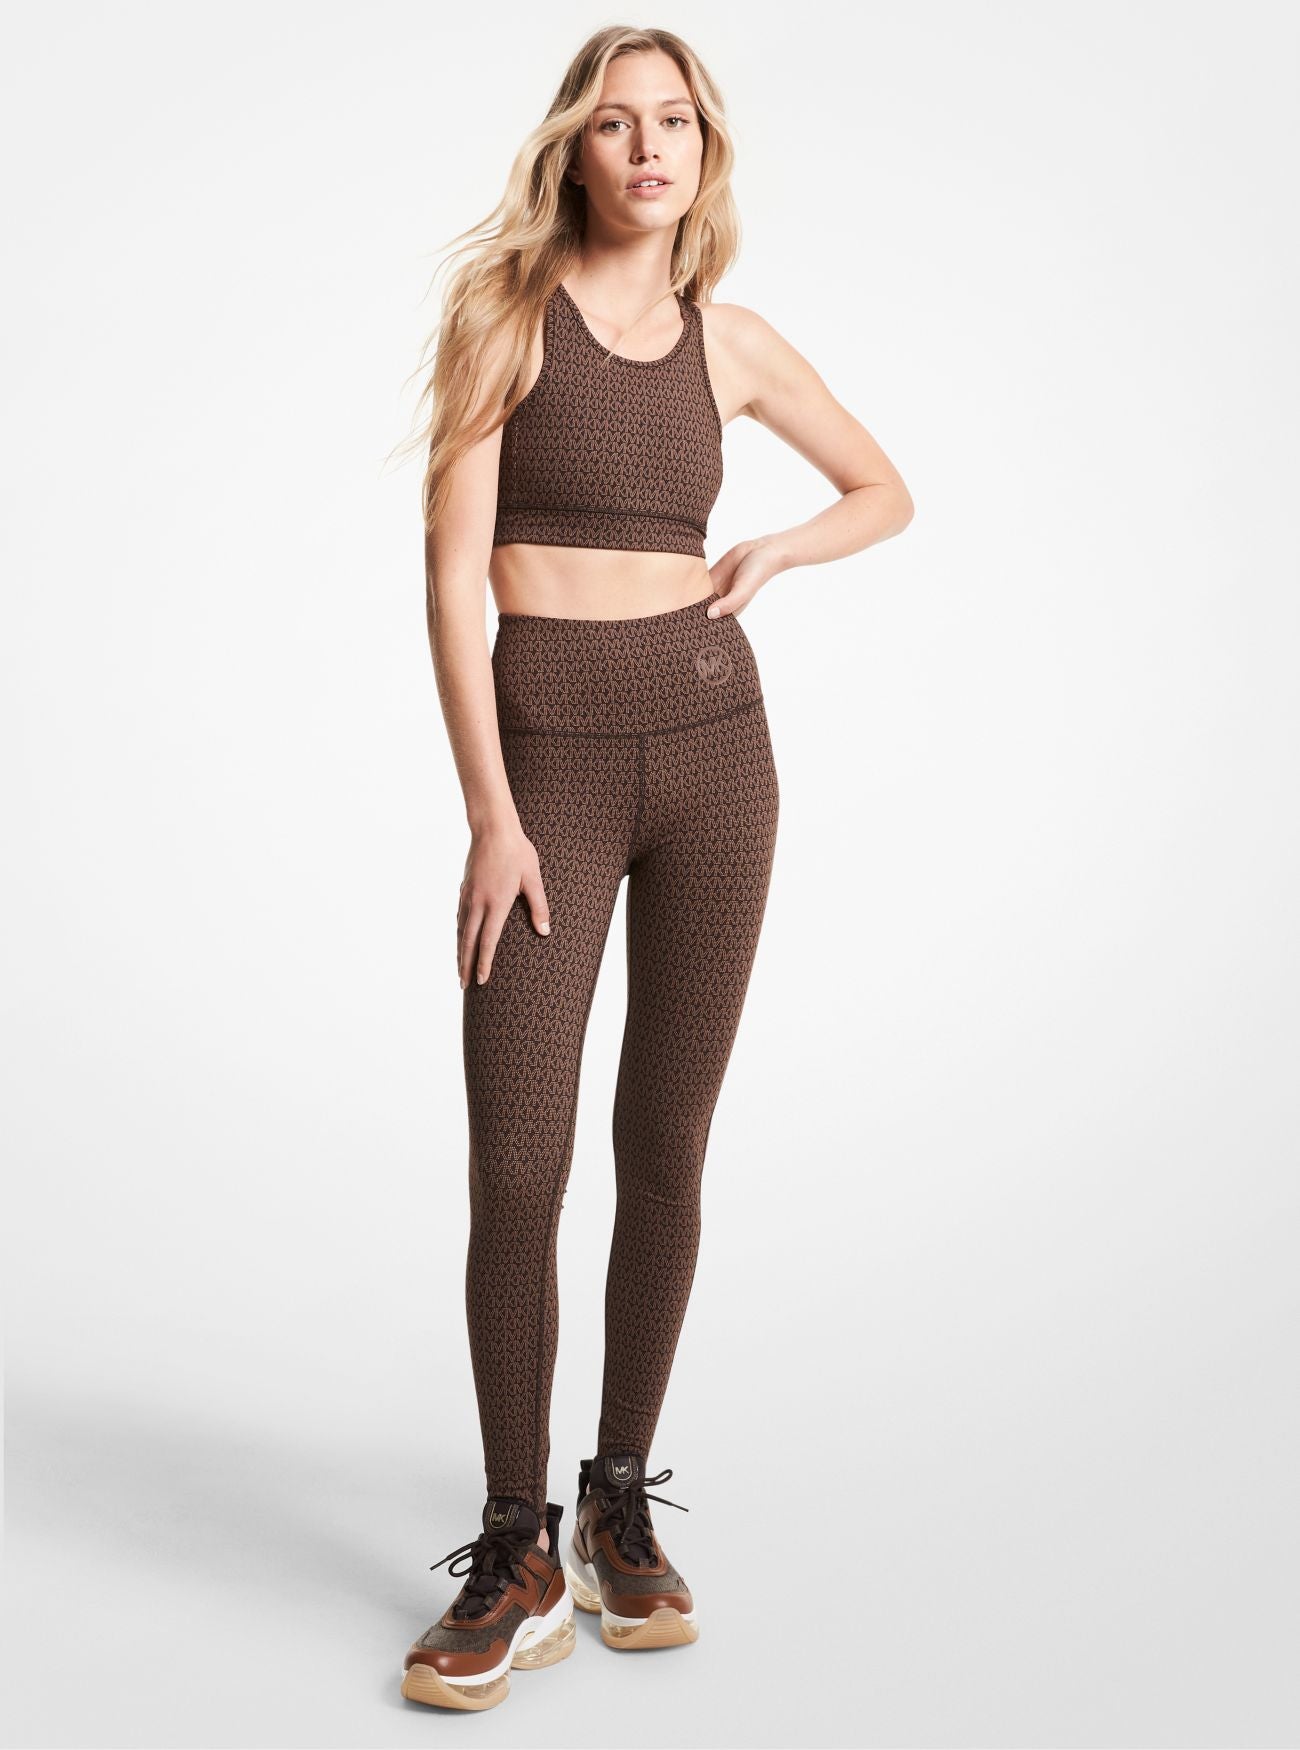 Michael kors-f-collapsible tights